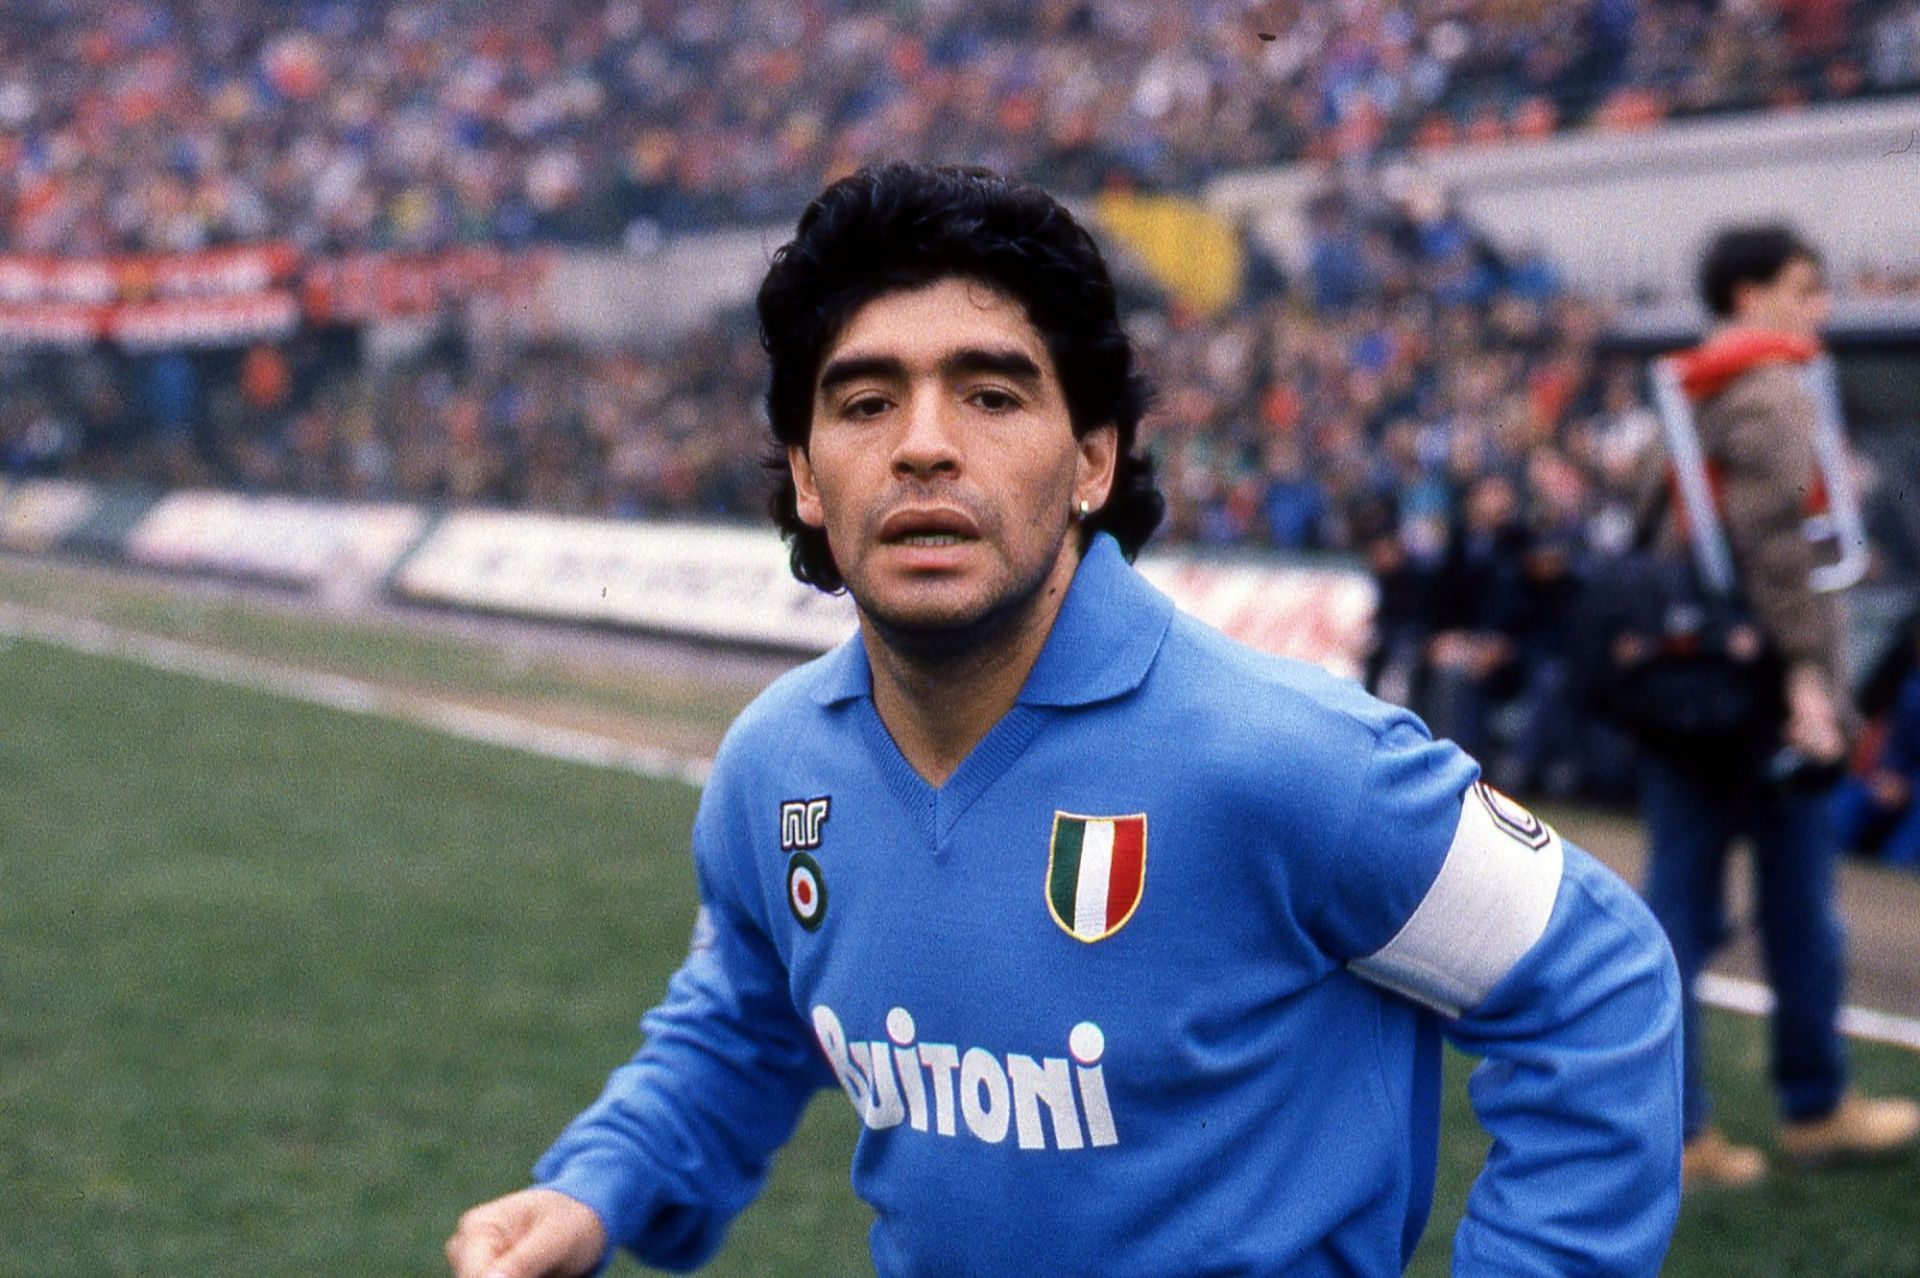 Diego Maradona was incredible for Napoli and Argentina.